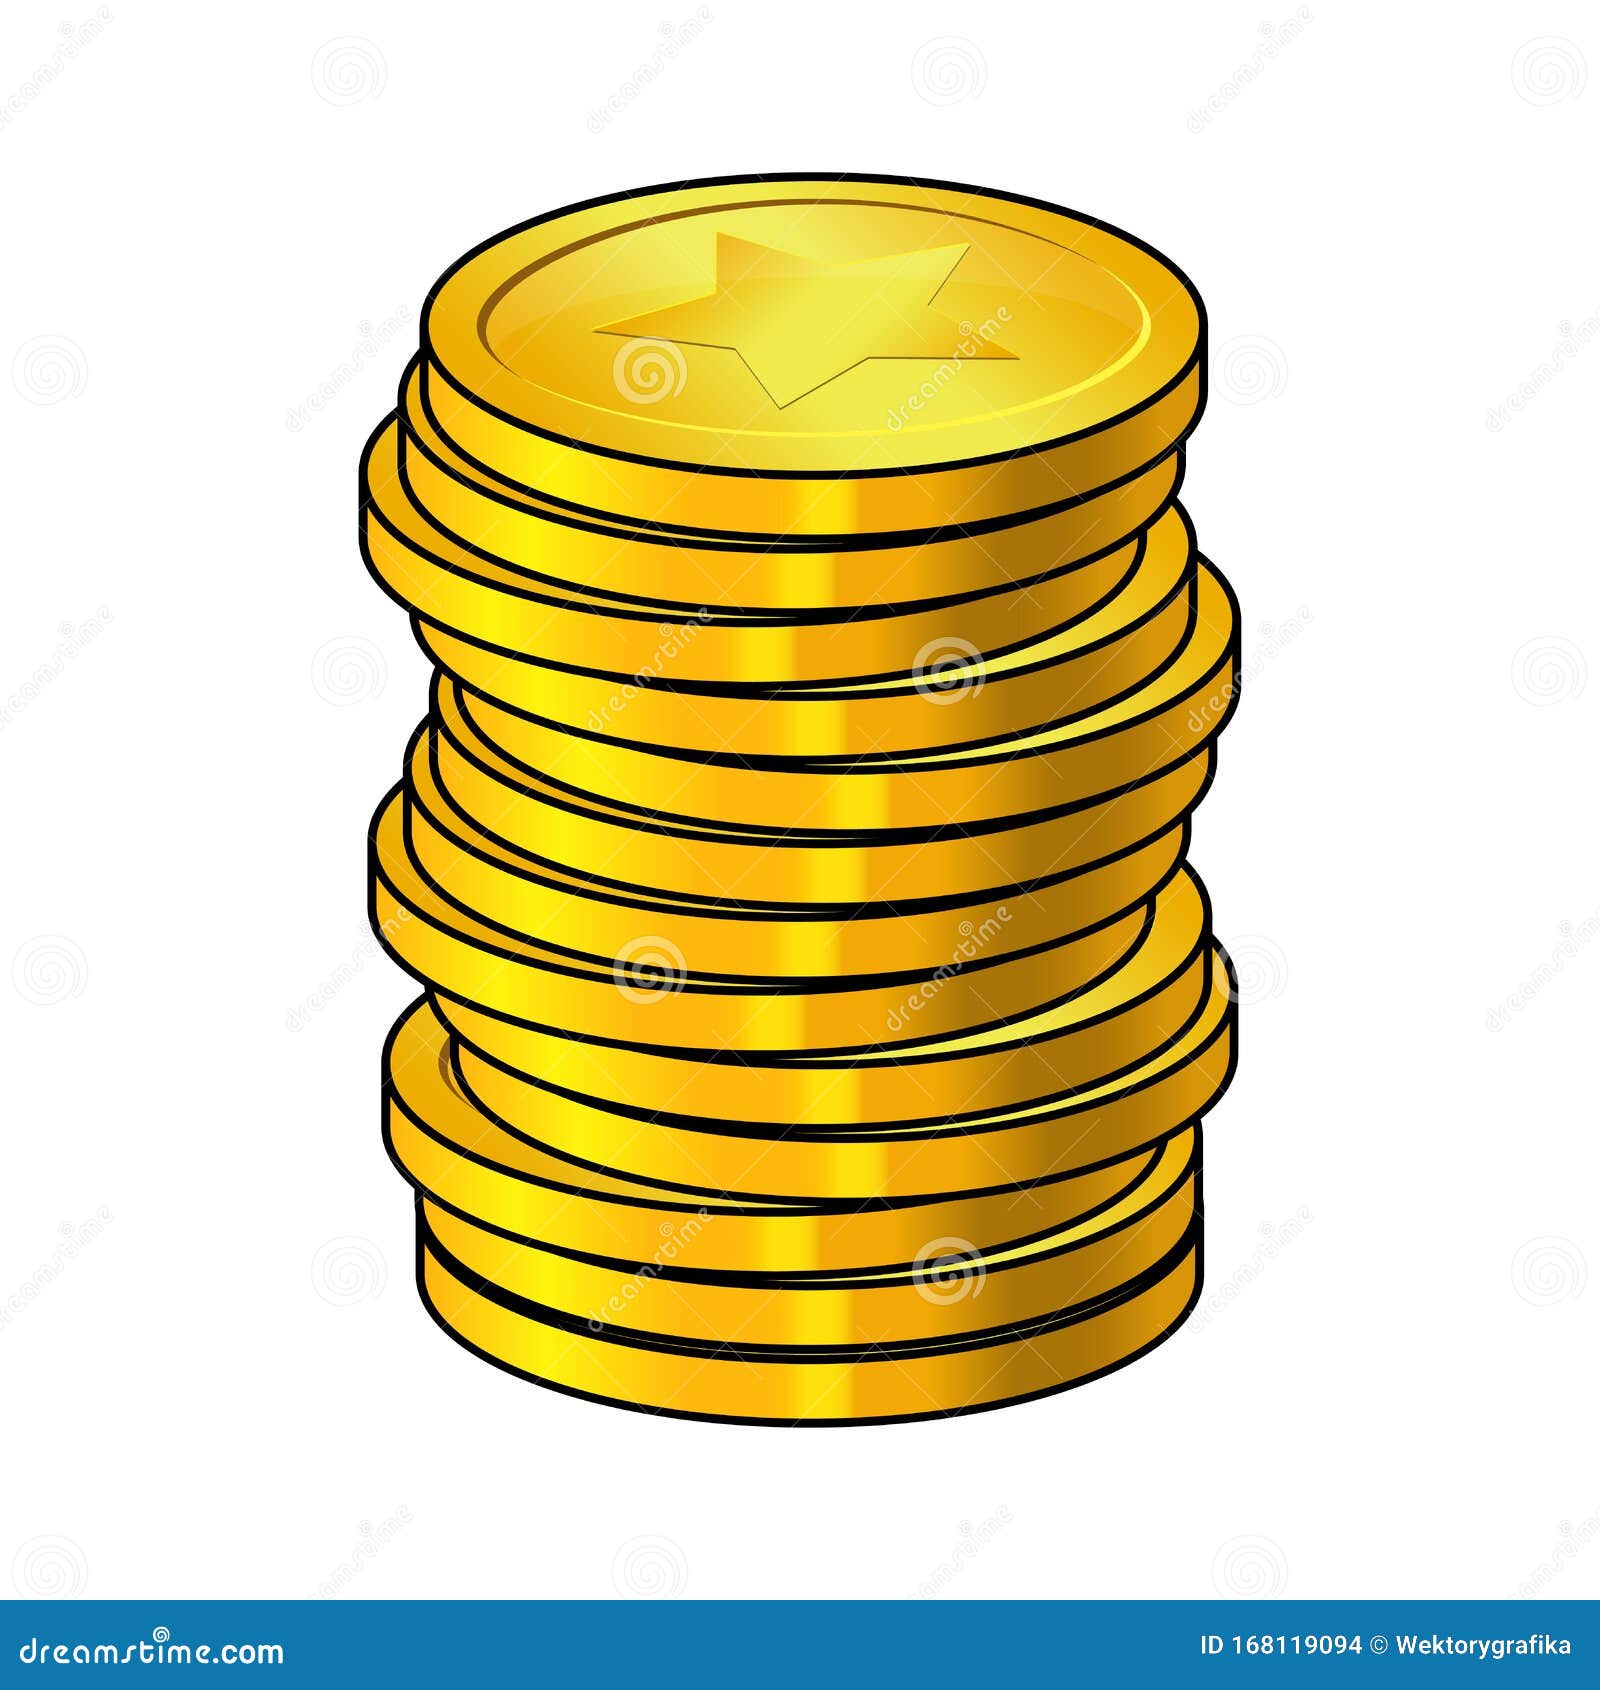 Pile of Gold Coins Cartoon Vector Illustration Isolated on White  Background. Cash Heap, Golden Column Money Stack Stock Vector -  Illustration of circle, gold: 168119094